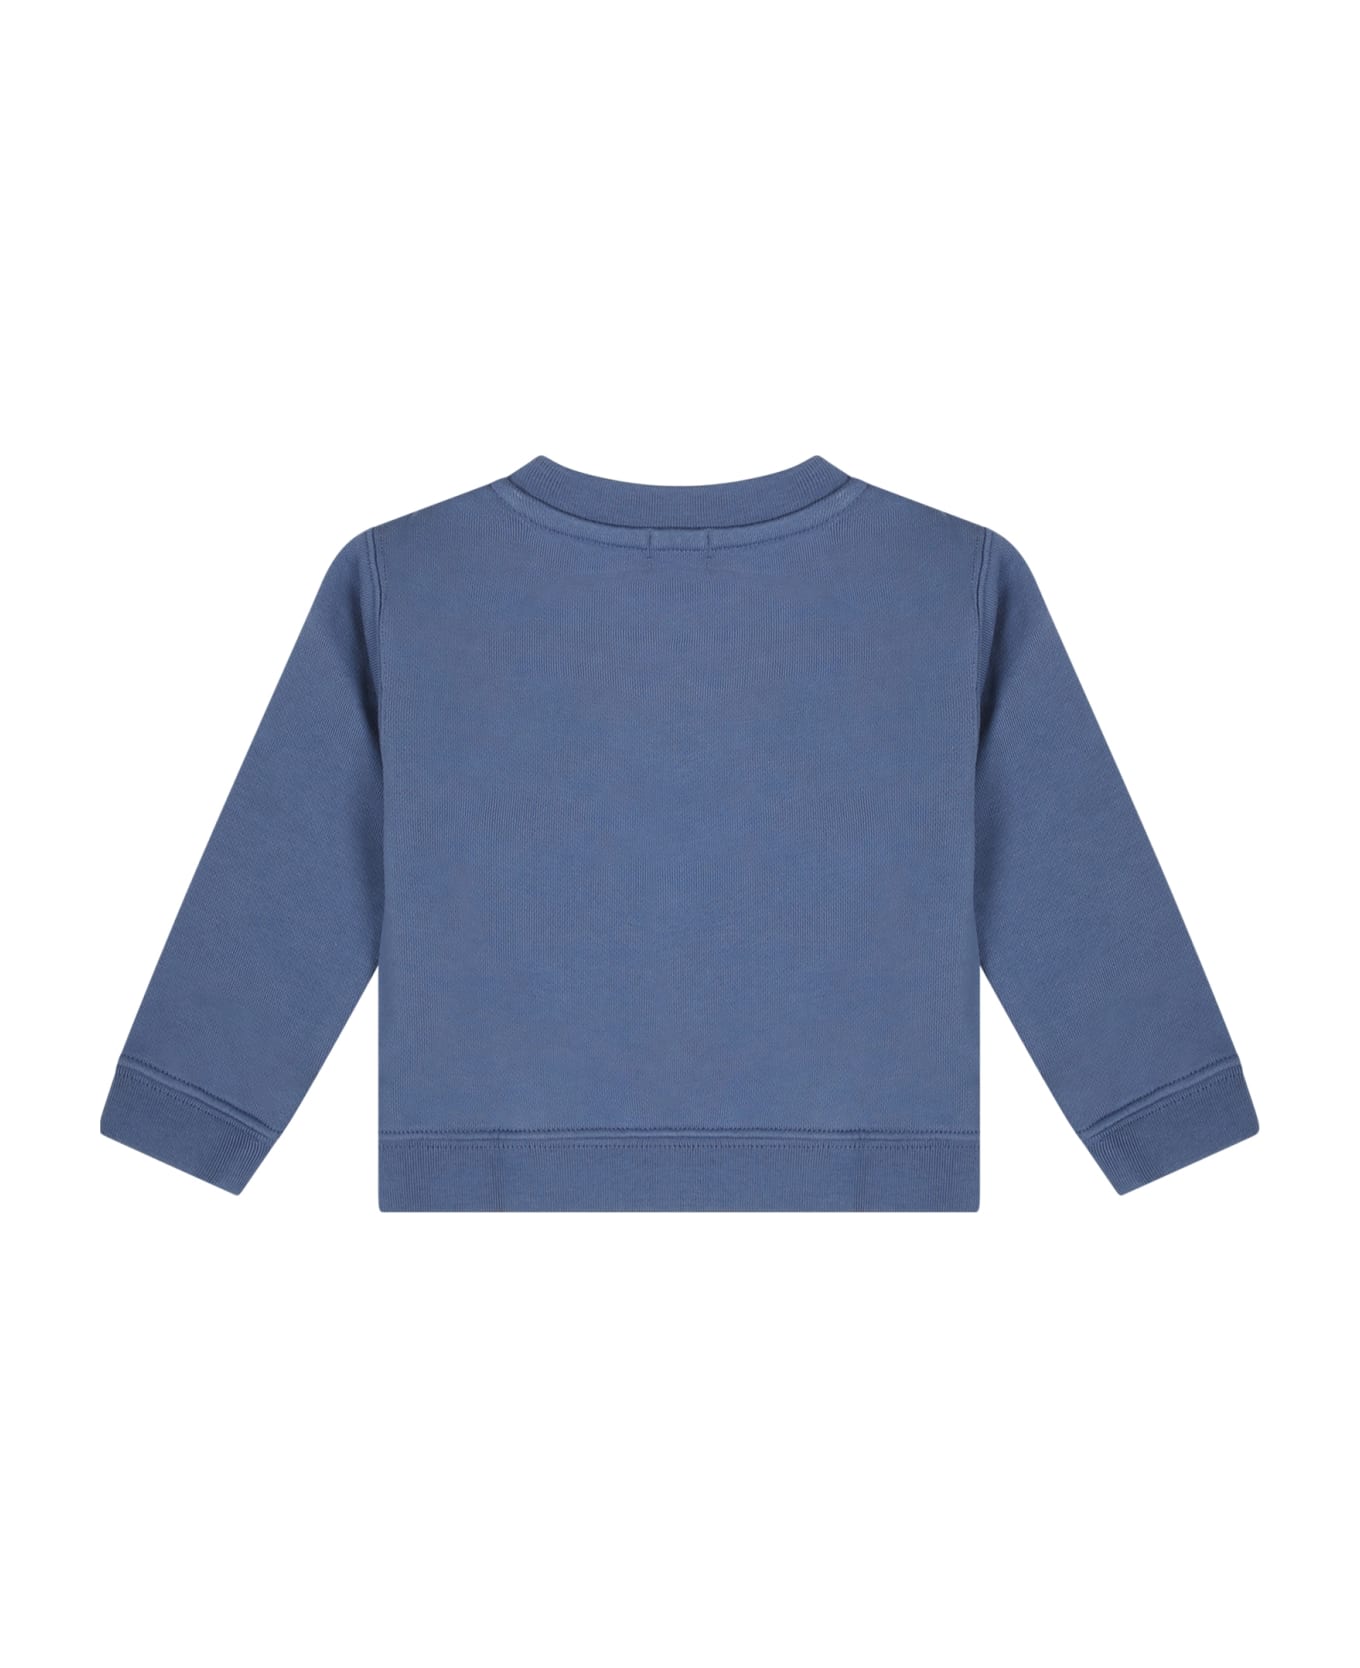 Palm Angels Blue Sweatshirt For Baby Girl With Bear - Blue